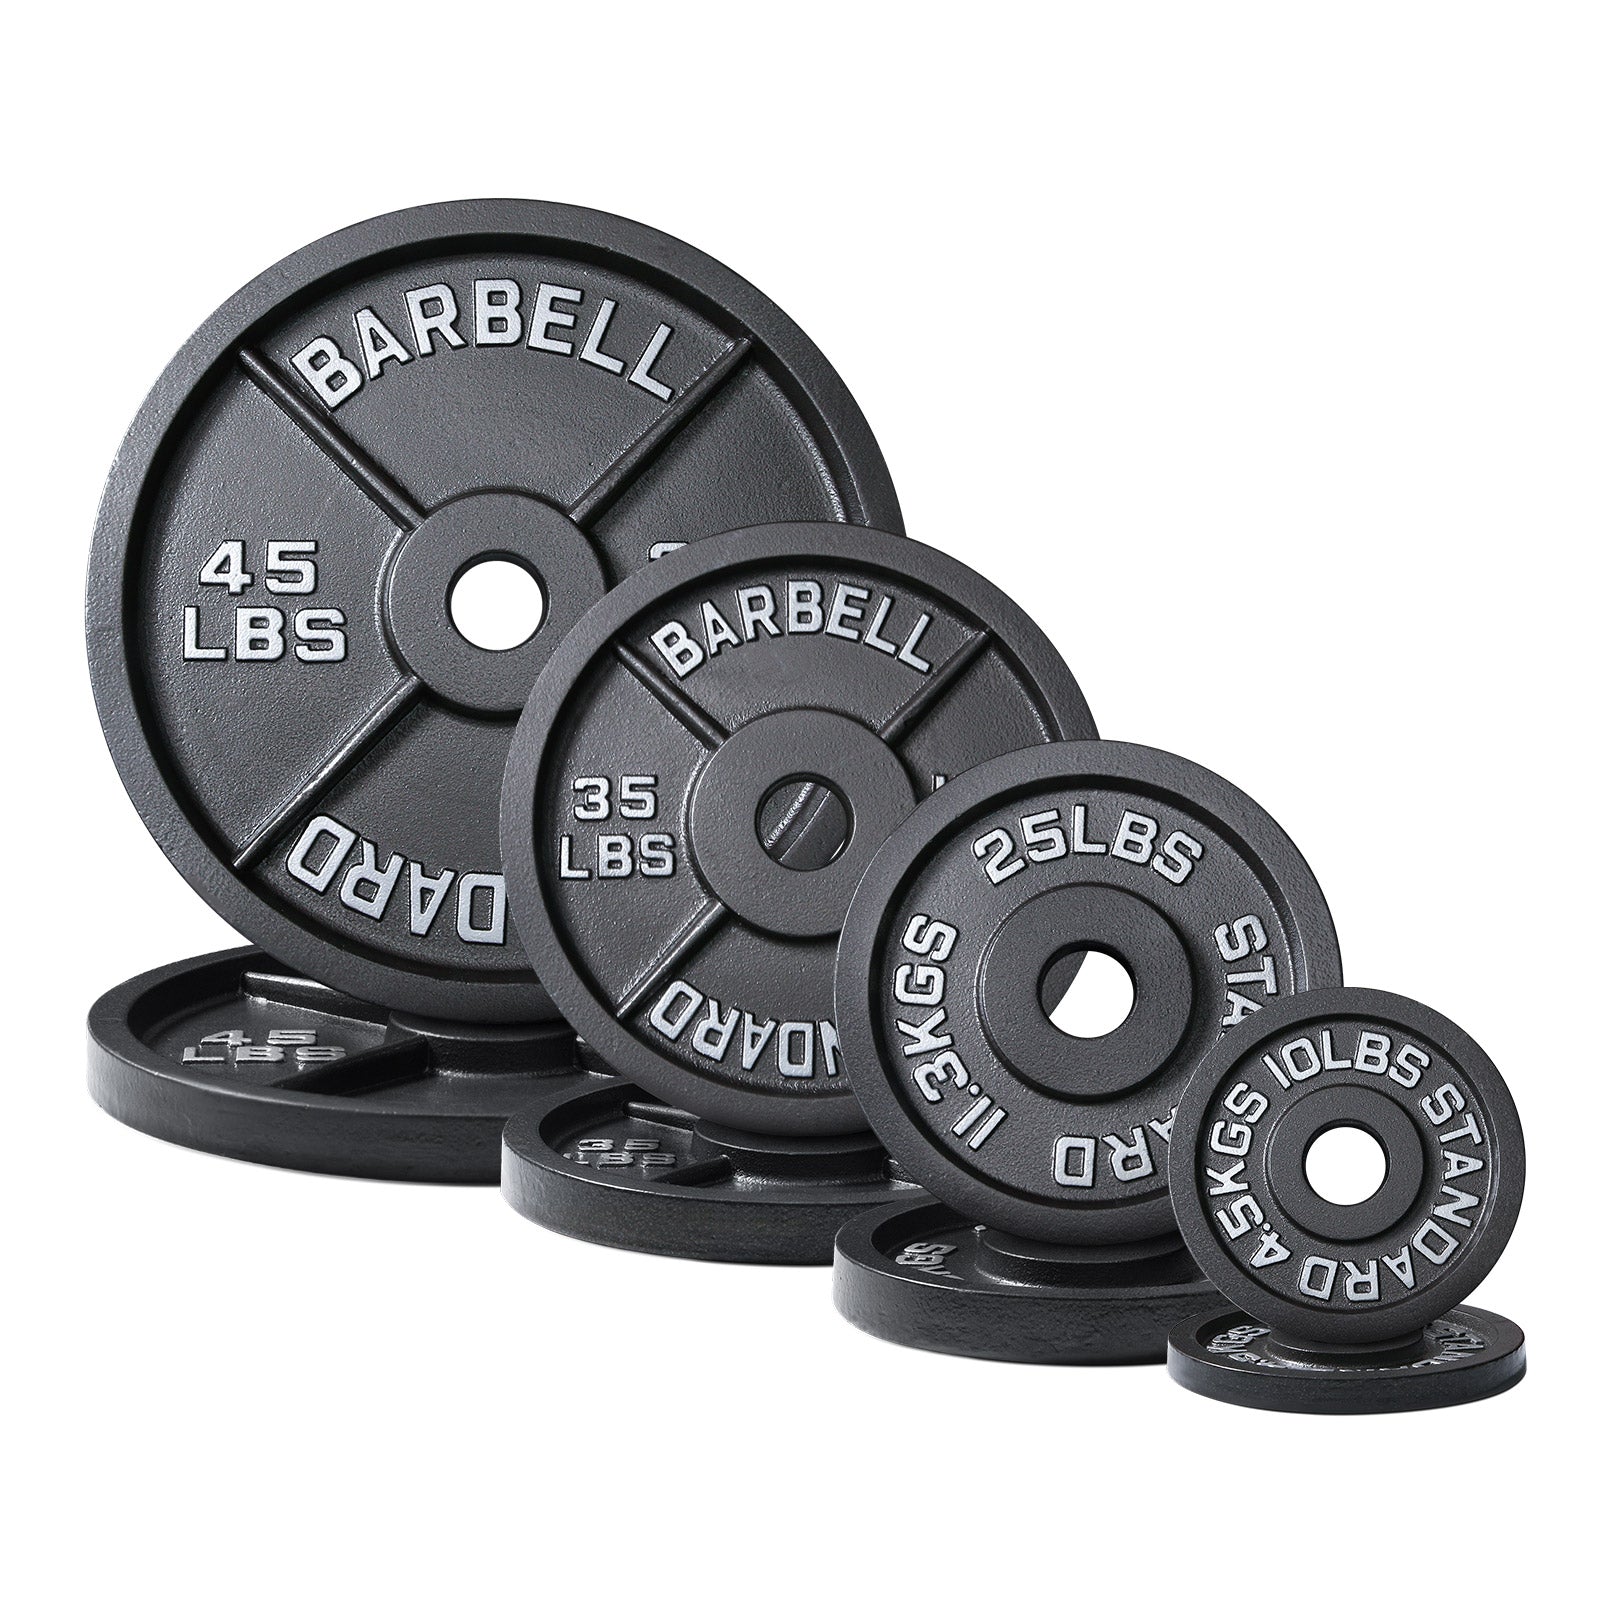 RitFit Old School Single-sided Black Iron Weight Plates, 2'' Olympic Plates Bars&Plates RitFit 230LB Set 